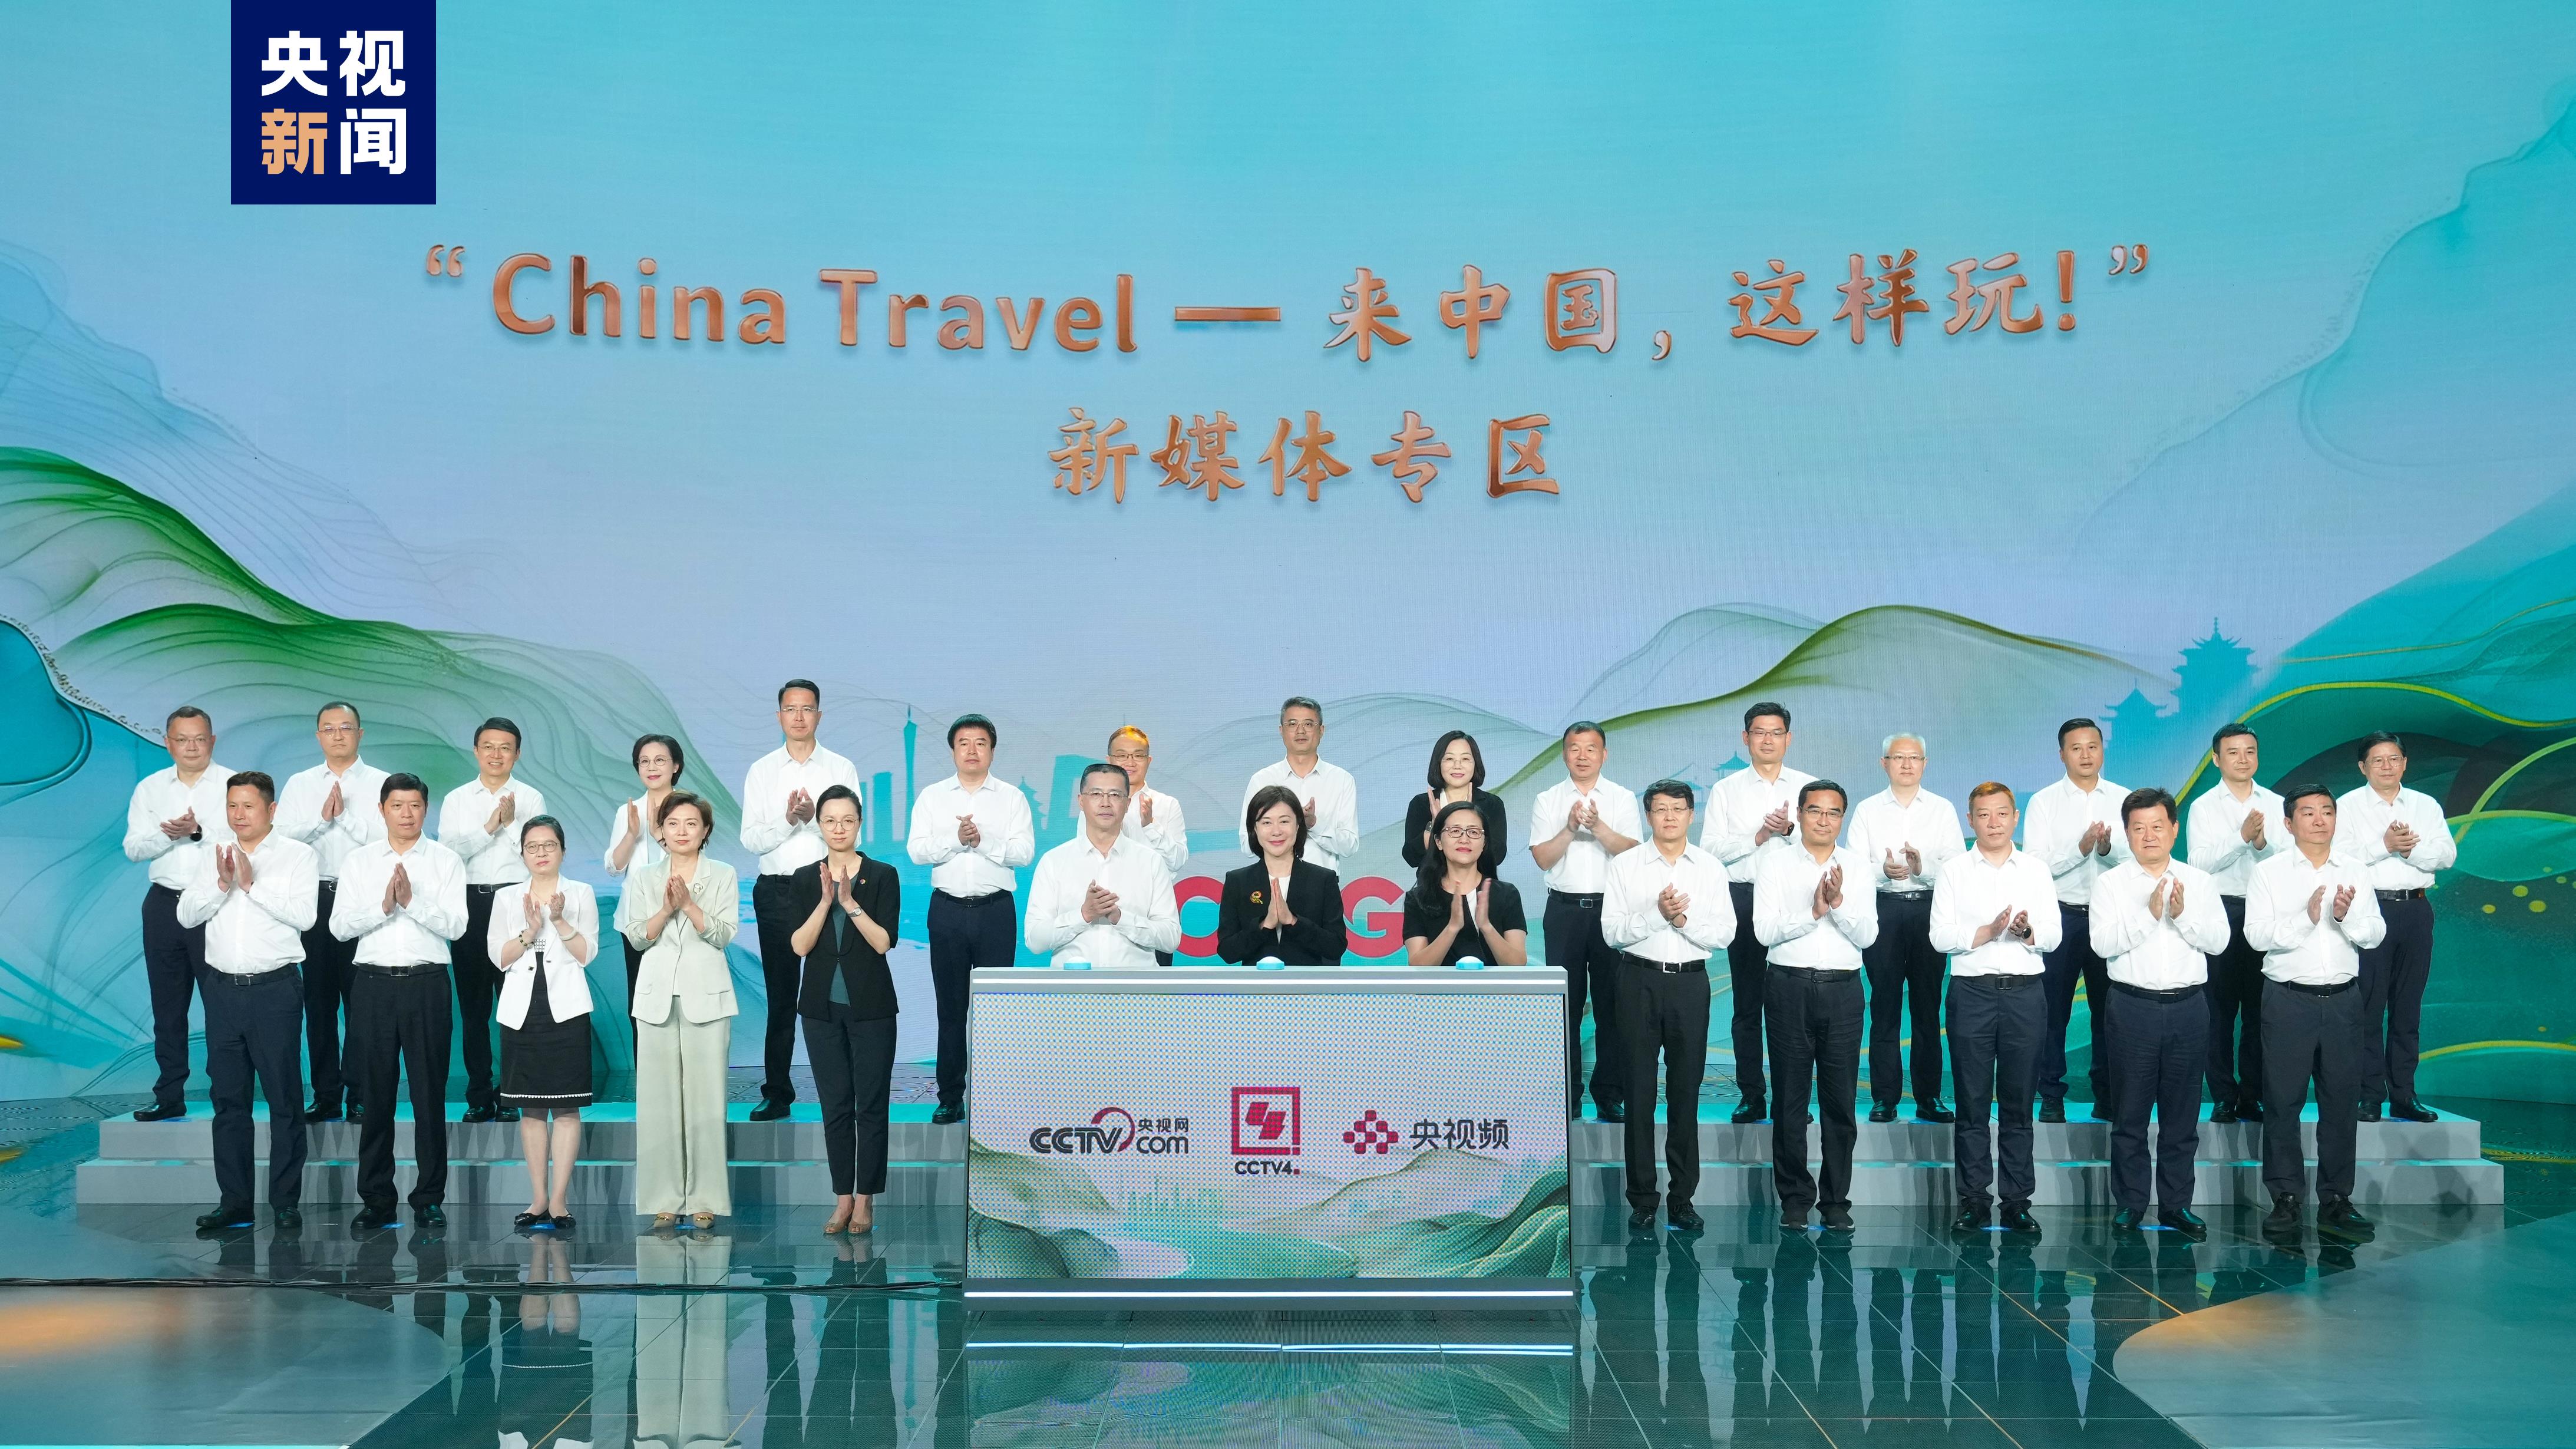 A scene from the launch of China Media Group's 